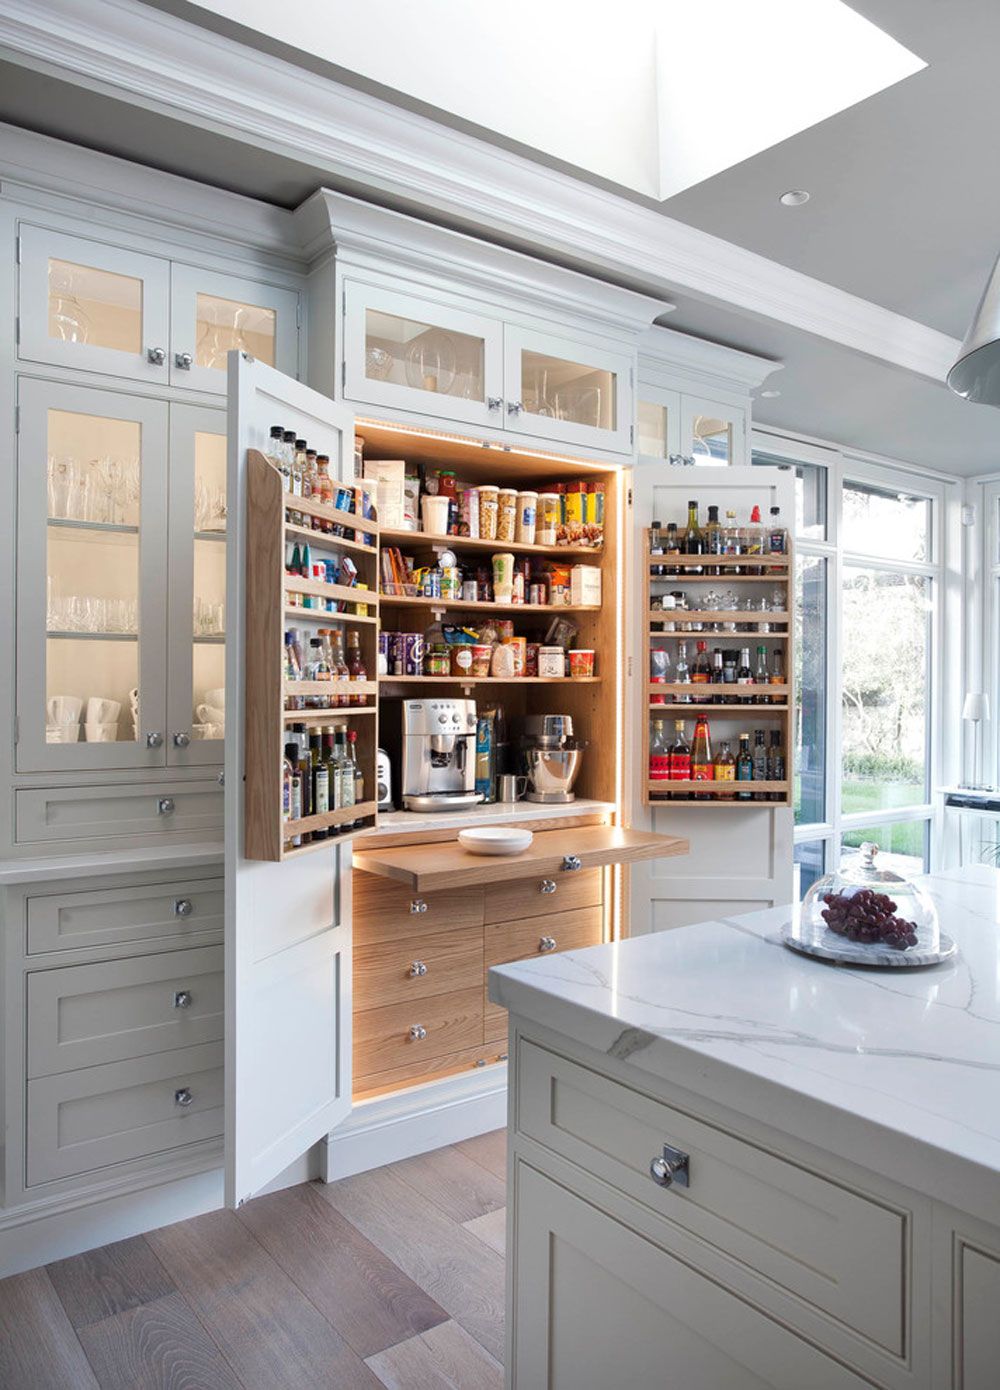 Kitchen-Larder-by-Woodale Pantry cabinet ideas: Shelving and storage ideas for your kitchen